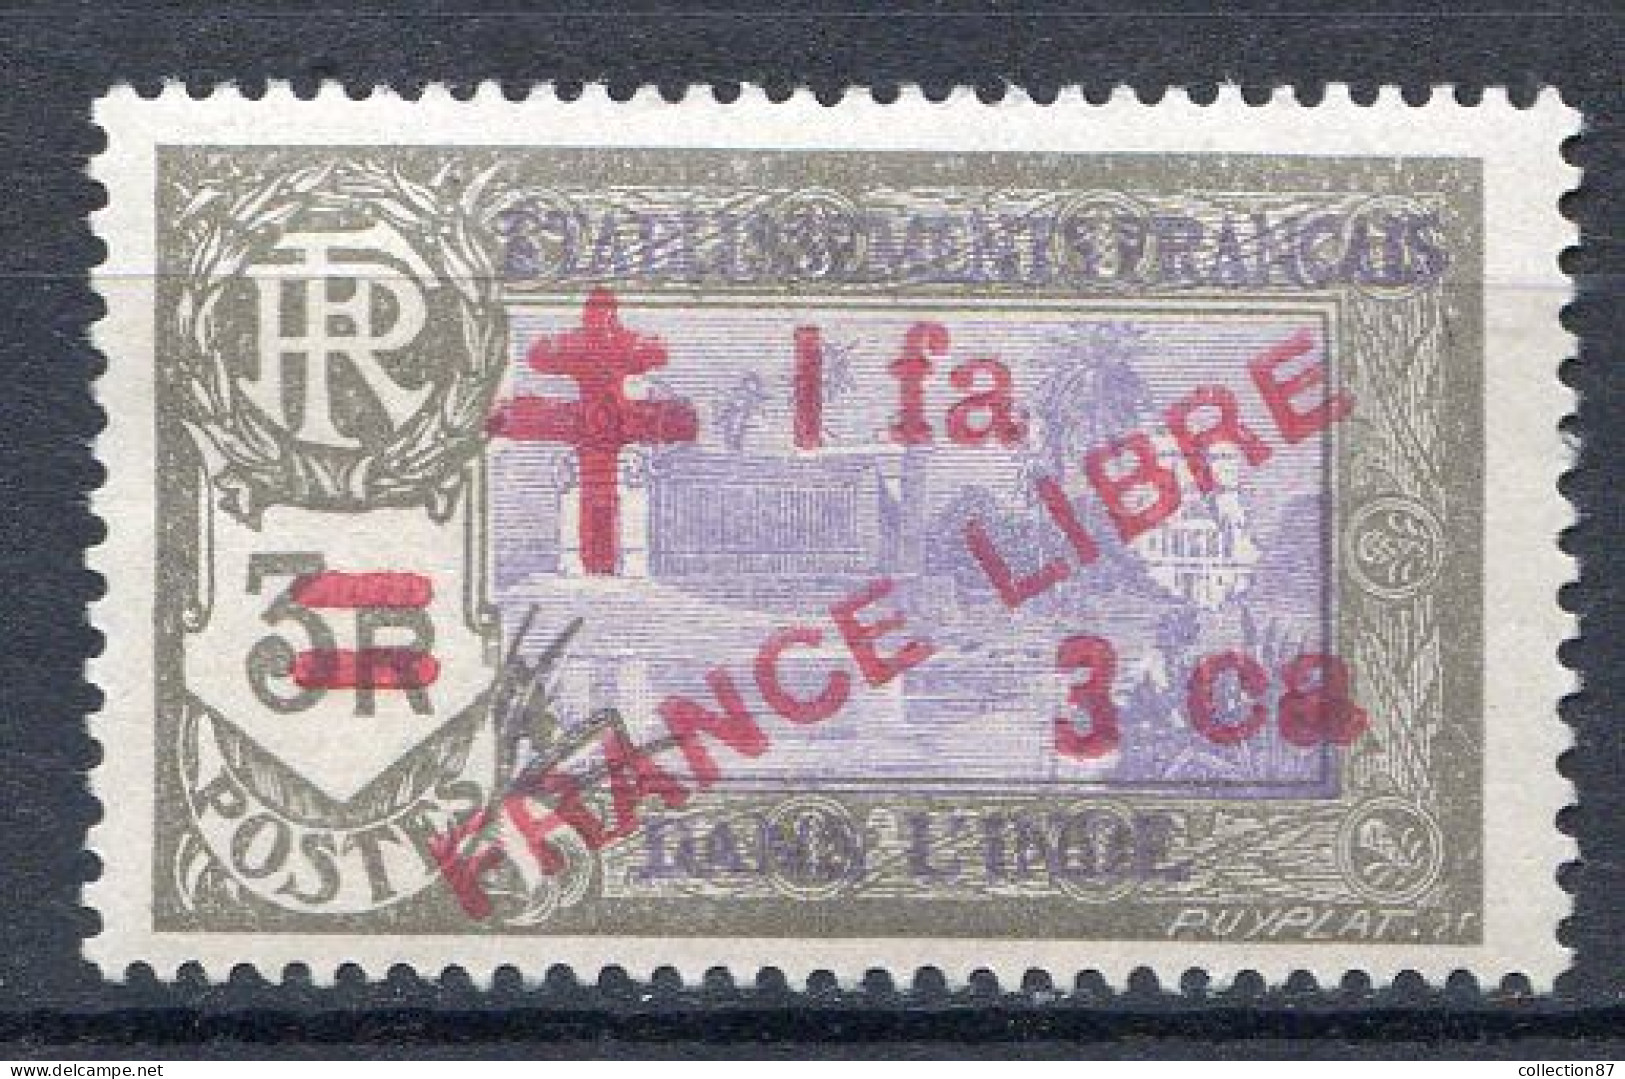 Réf 75 CL2 < -- INDE - FRANCE LIBRE < N° 211 * NEUF Ch.Dos Visible MH * - Ongebruikt